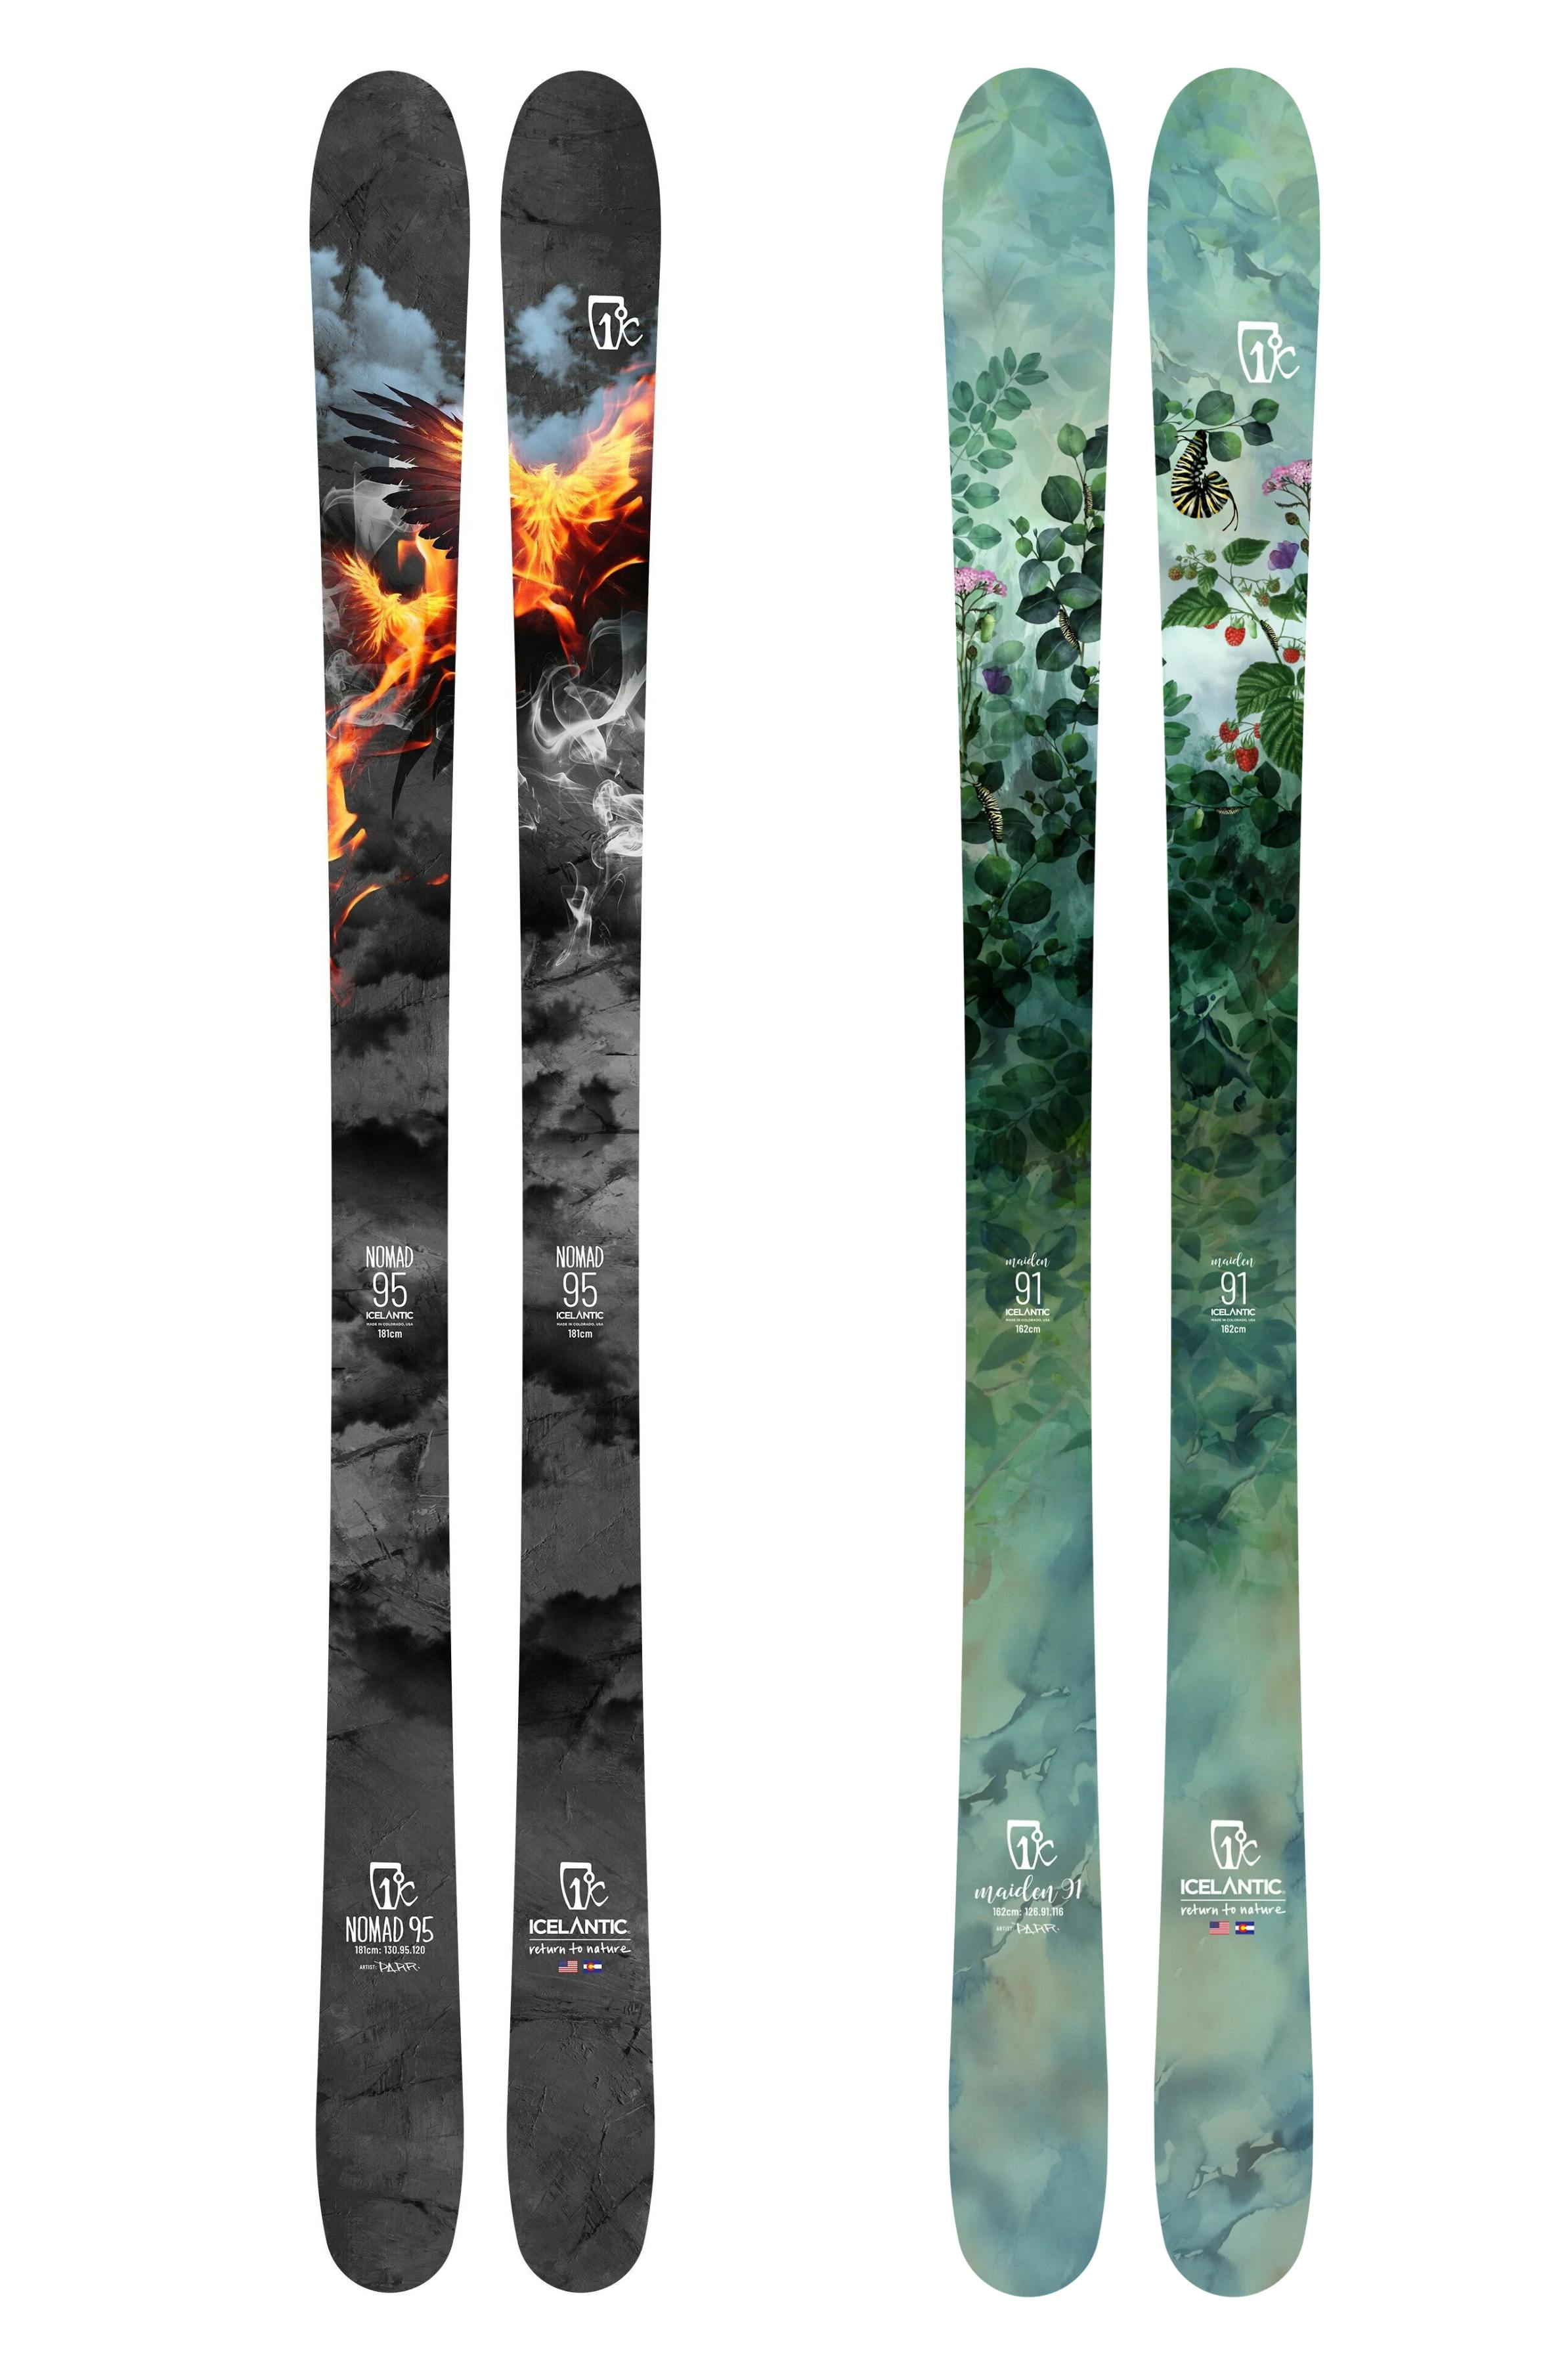 Product image of Nomad 95 and Maiden 91 skis